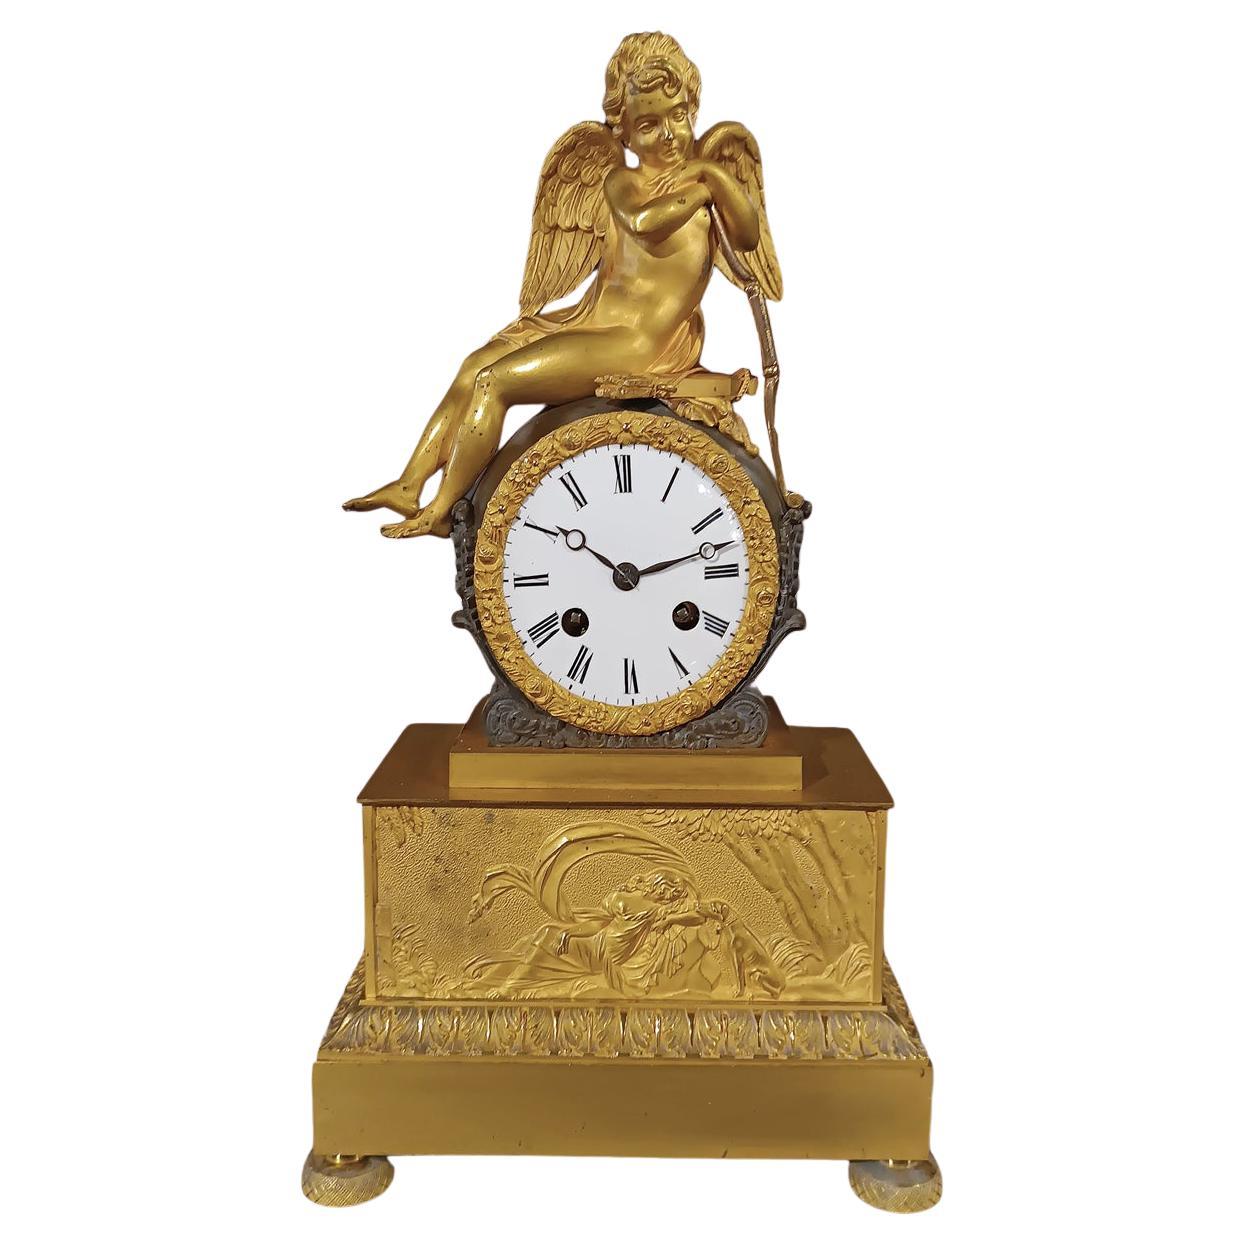 18th CENTURY NEOCLASSICAL CLOCK WITH CUPID